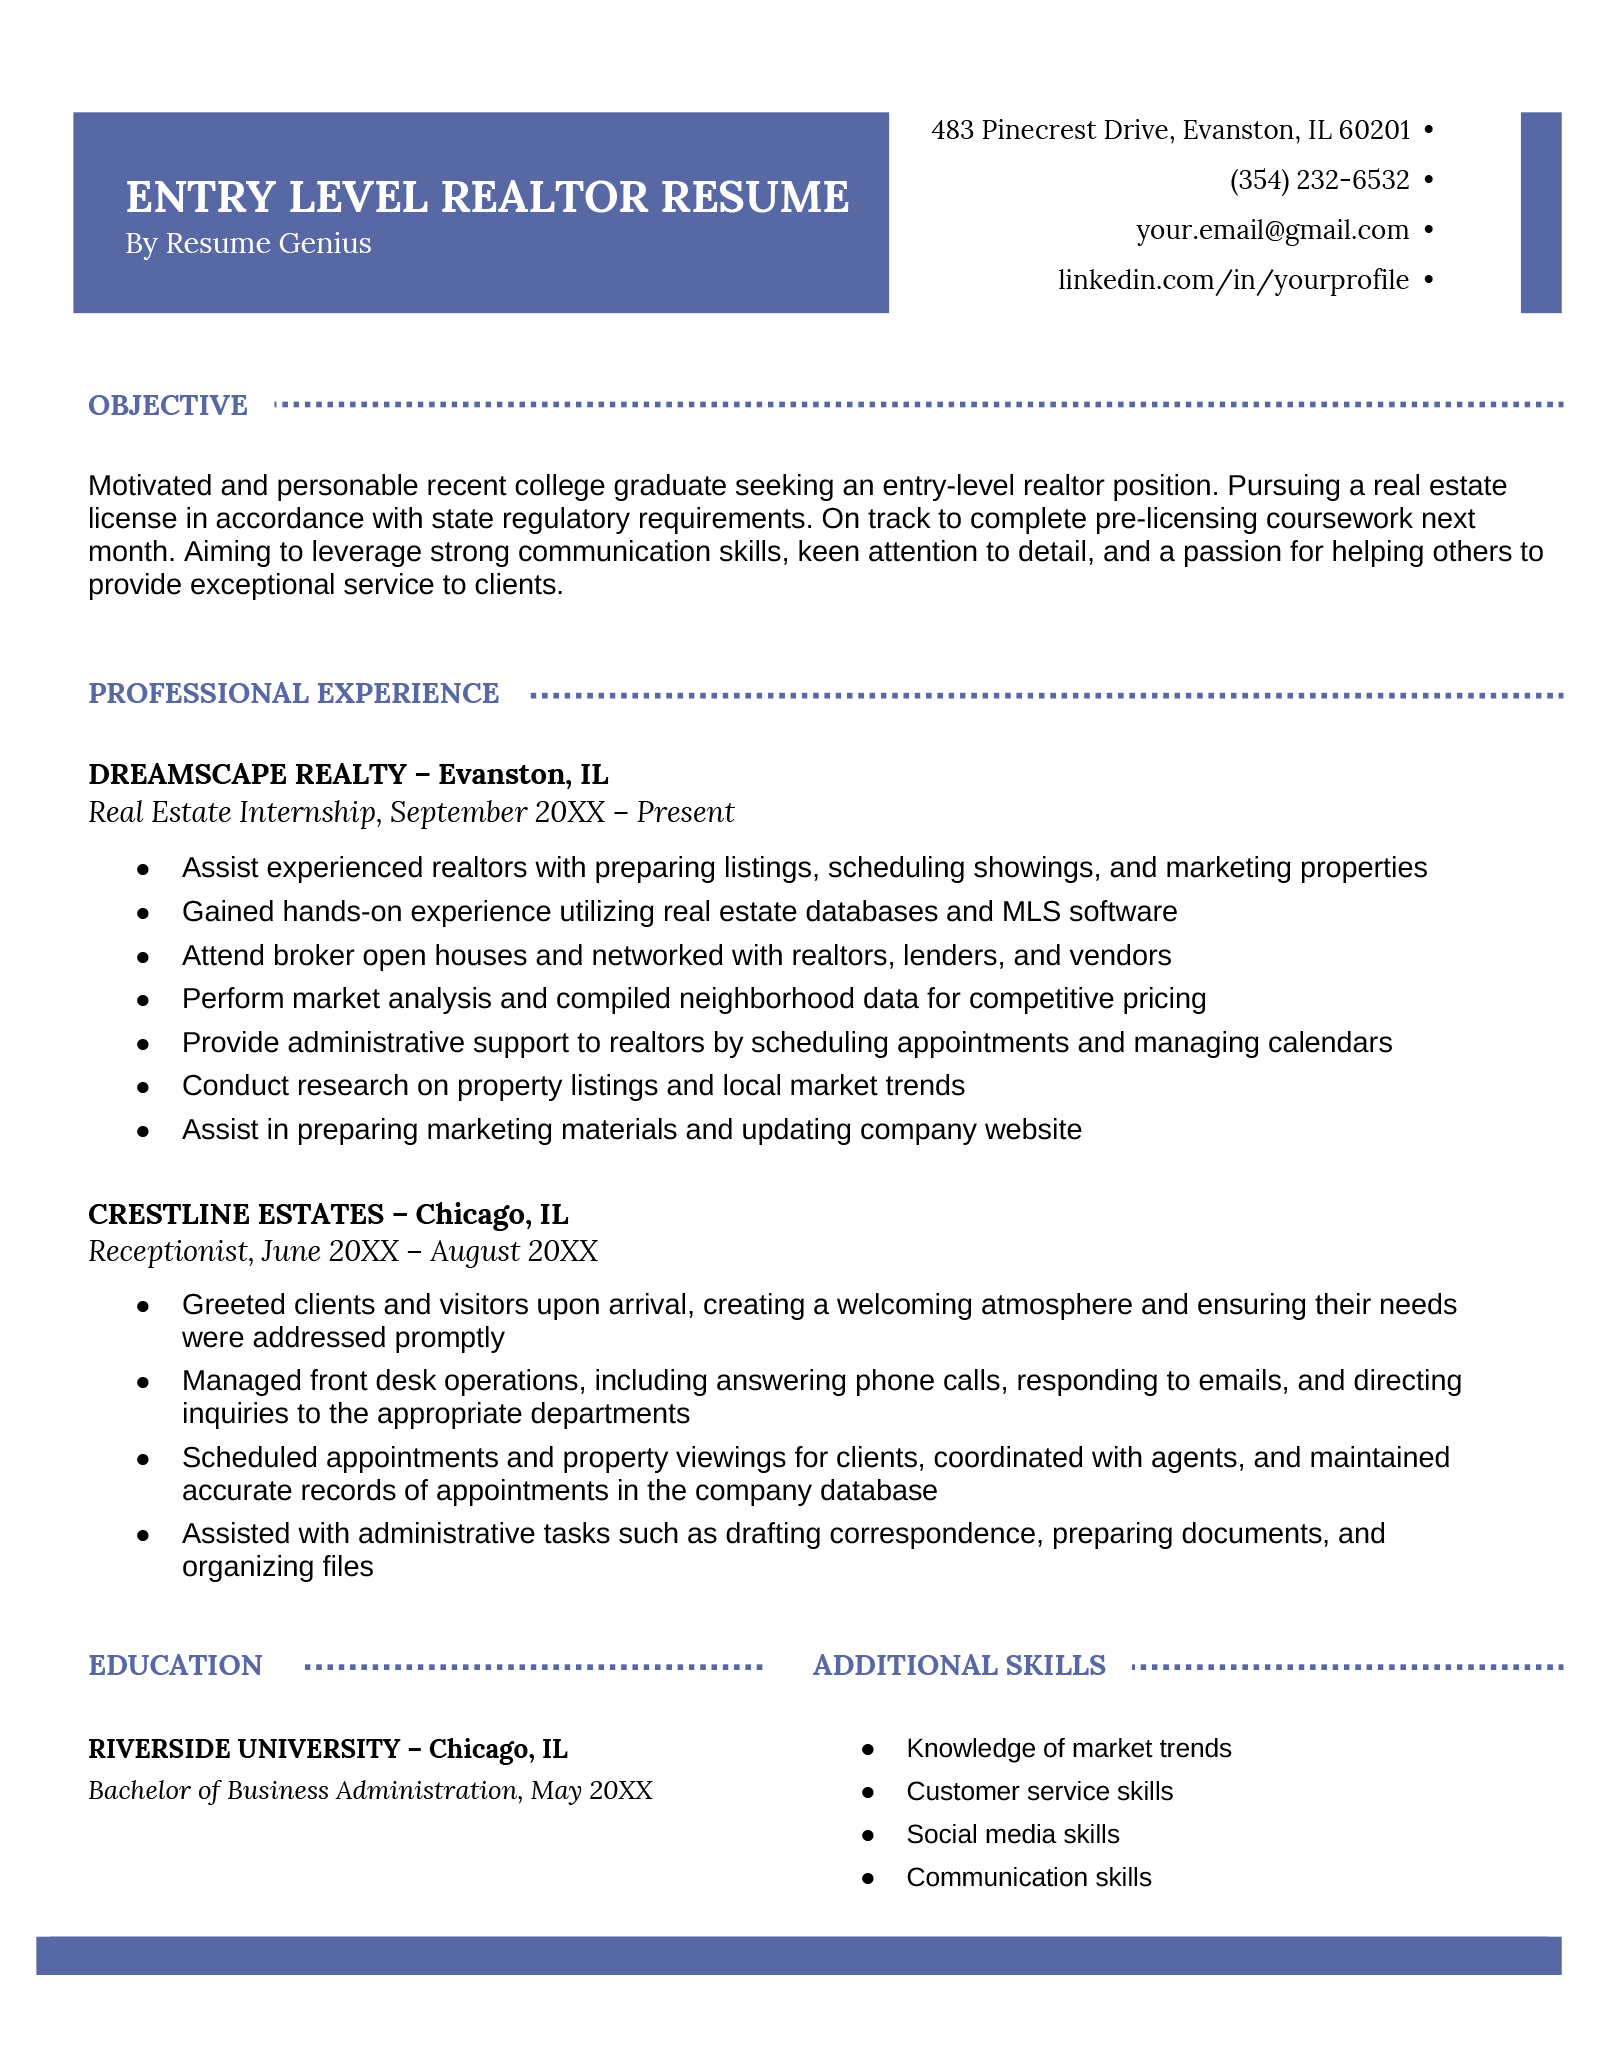 An example of an entry level real estate agent resume.